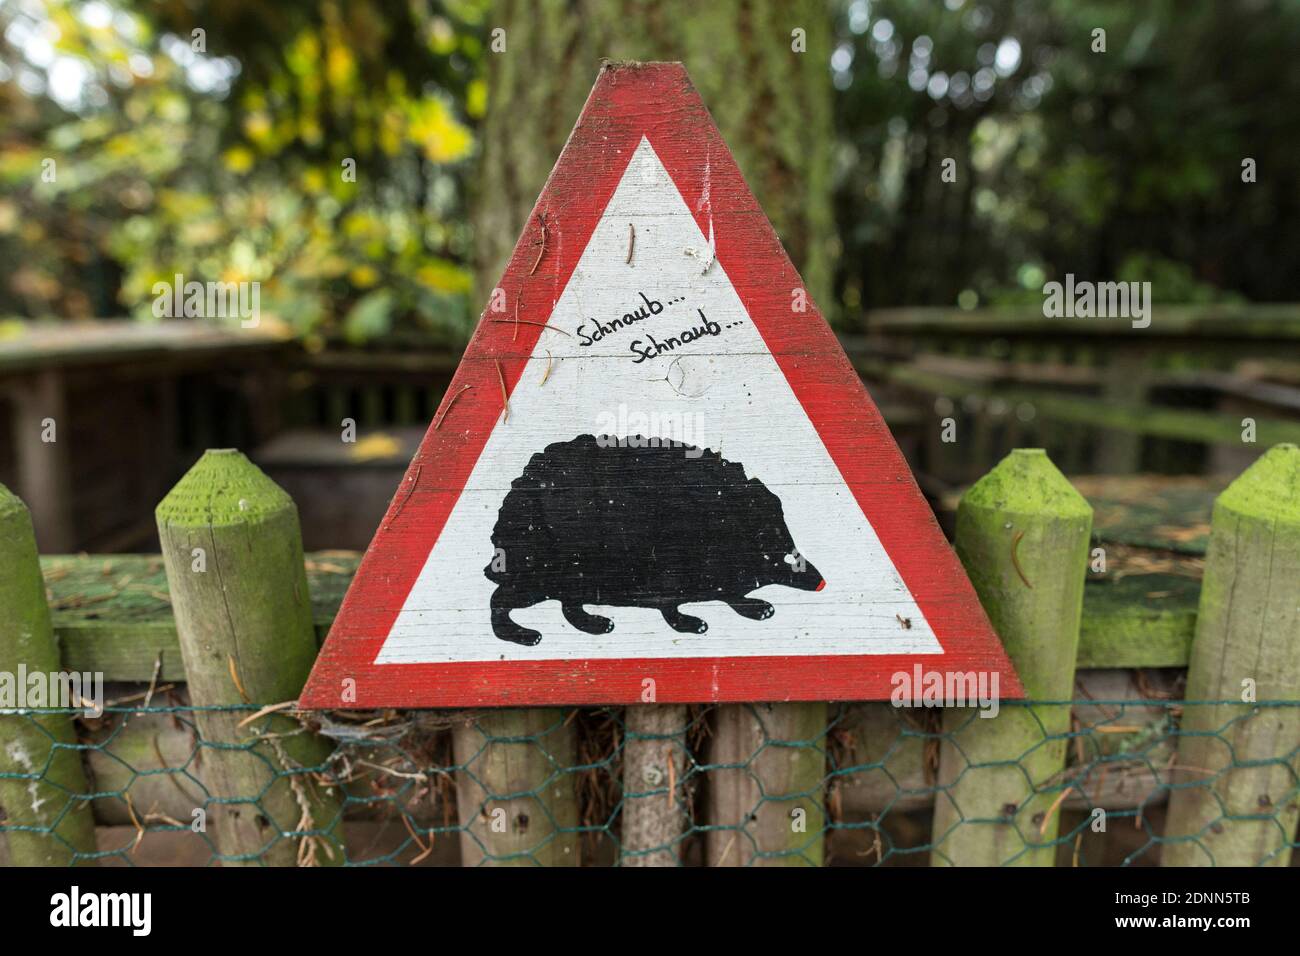 Common Hedgehog (Erinaceus europaeus). Sign at an outdoor enclosure for hedgehogs. Germany Stock Photo